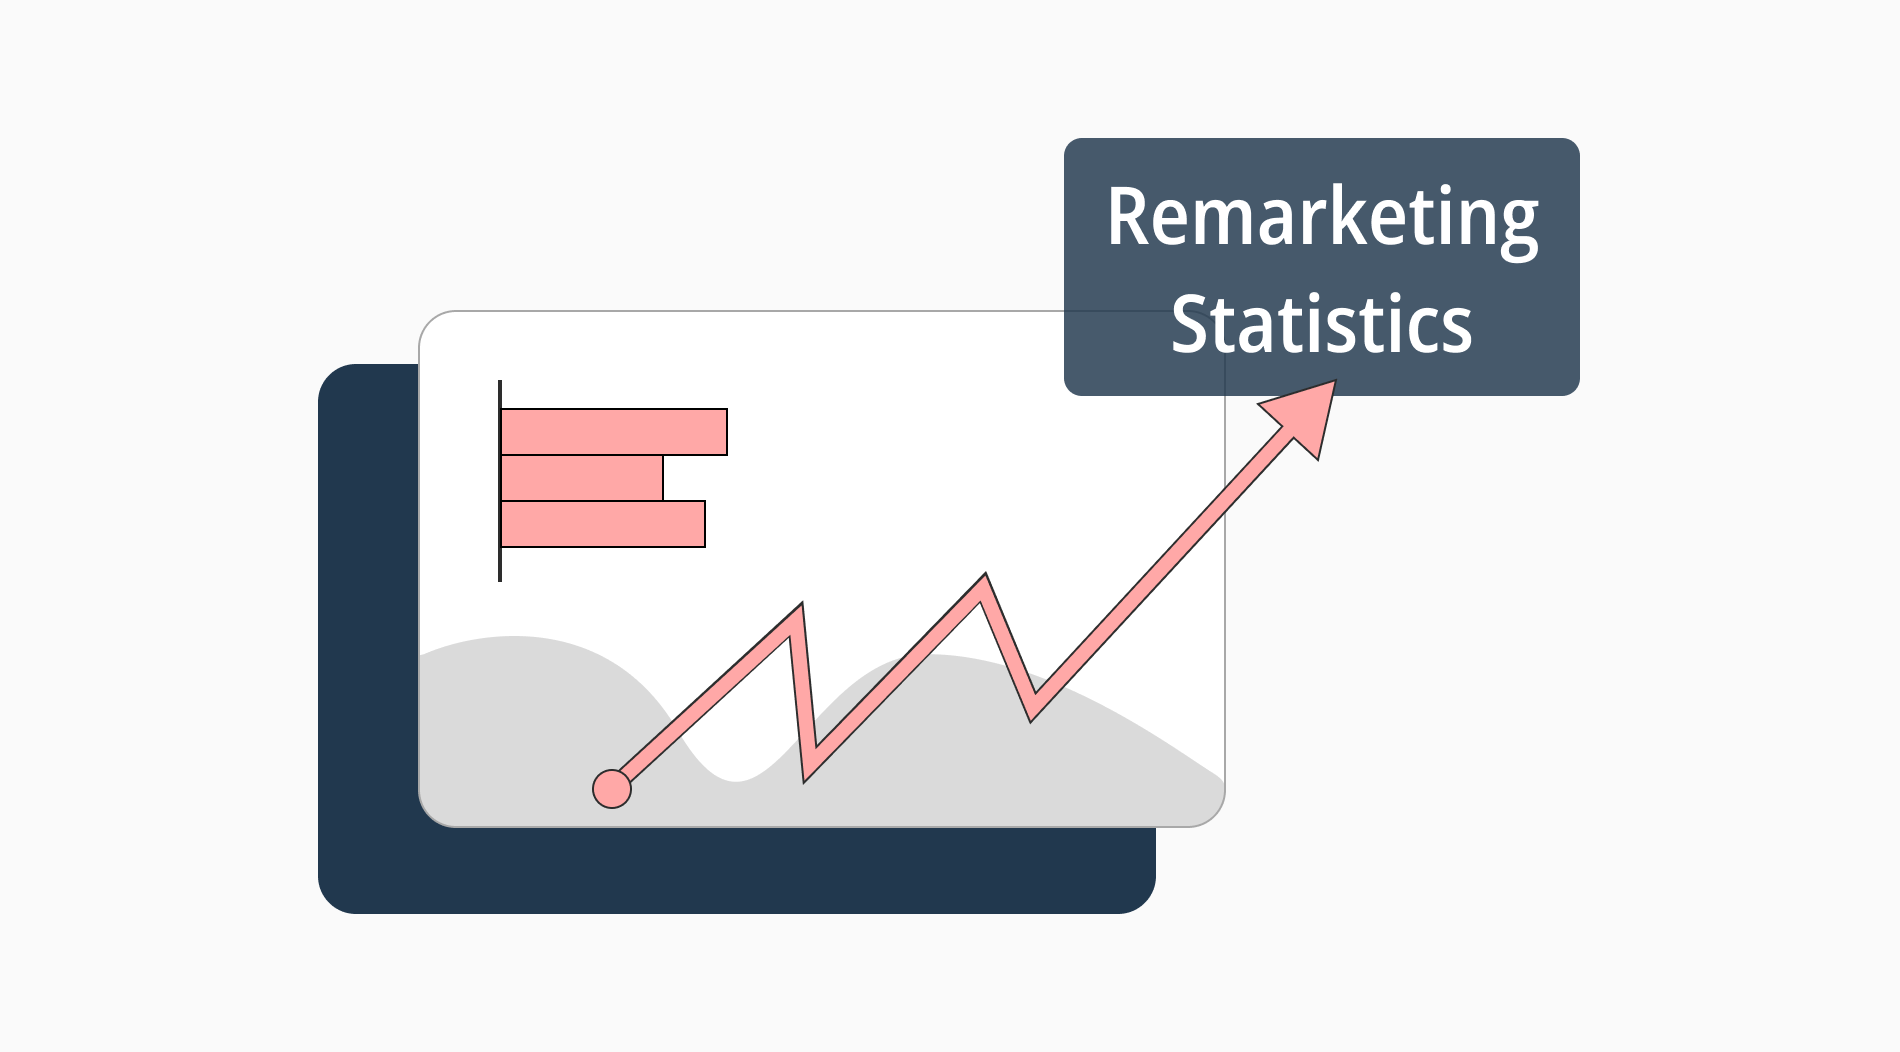 100+ Remarketing statistics for your business to use